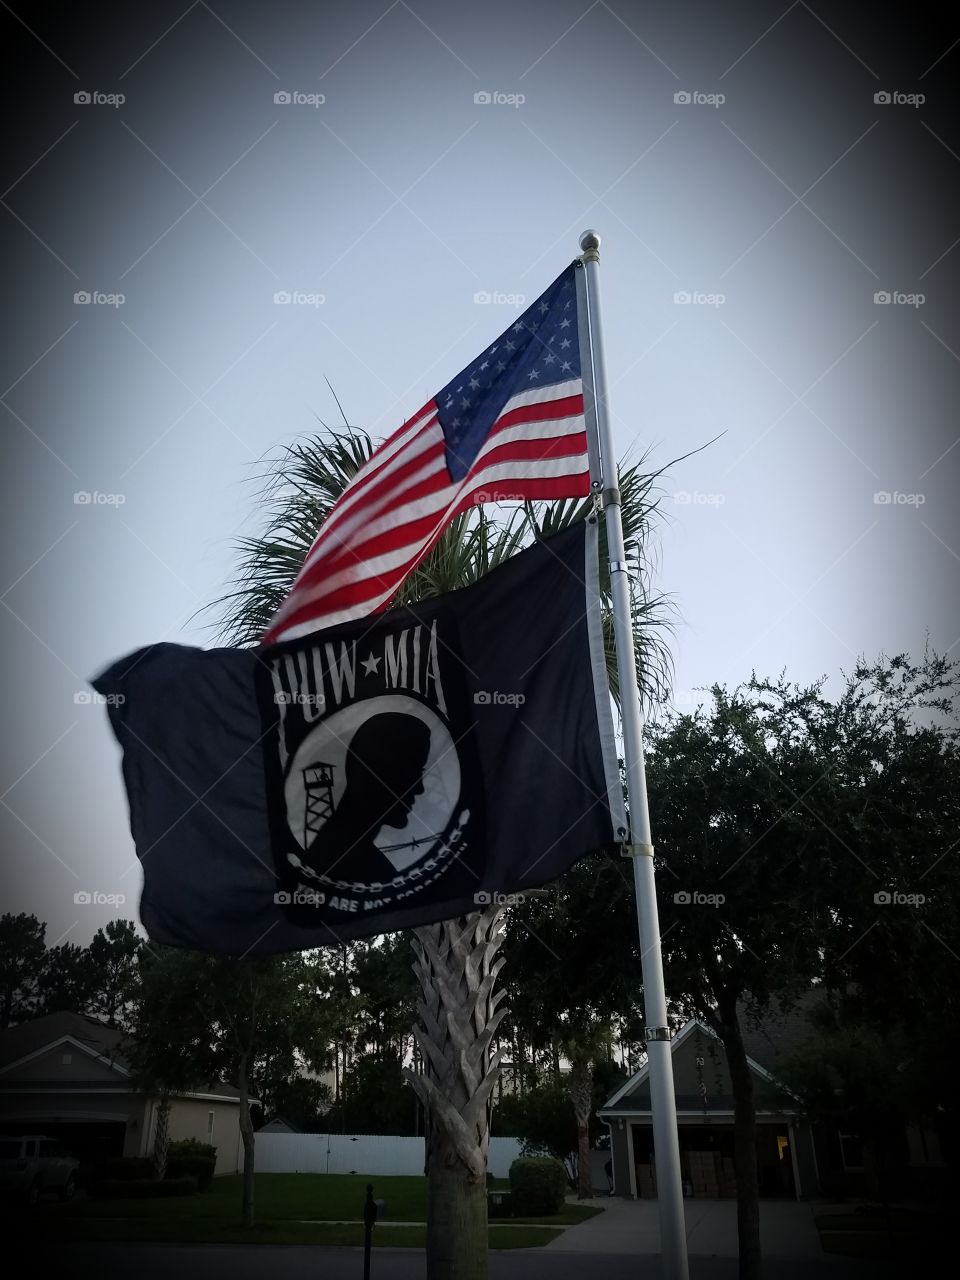 The greatest flag to ever fly, The American Flag and P.O.W flag